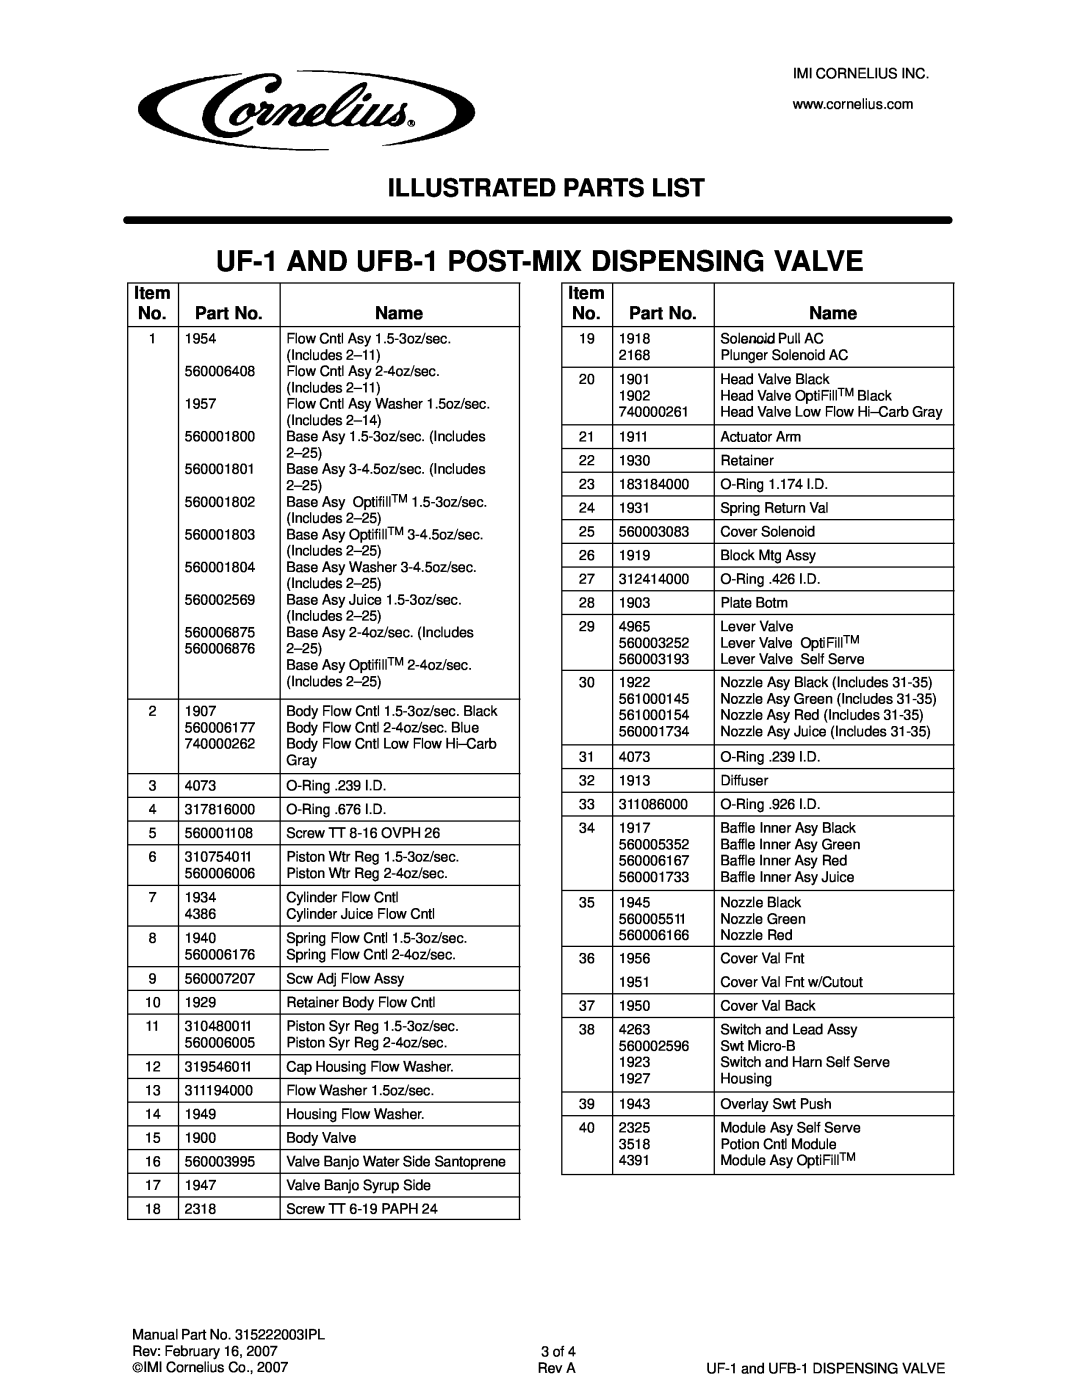 Panasonic manual UF-1AND UFB-1 POST-MIXDISPENSING VALVE, Illustrated Parts List, Name, Solenoid Pull AC 